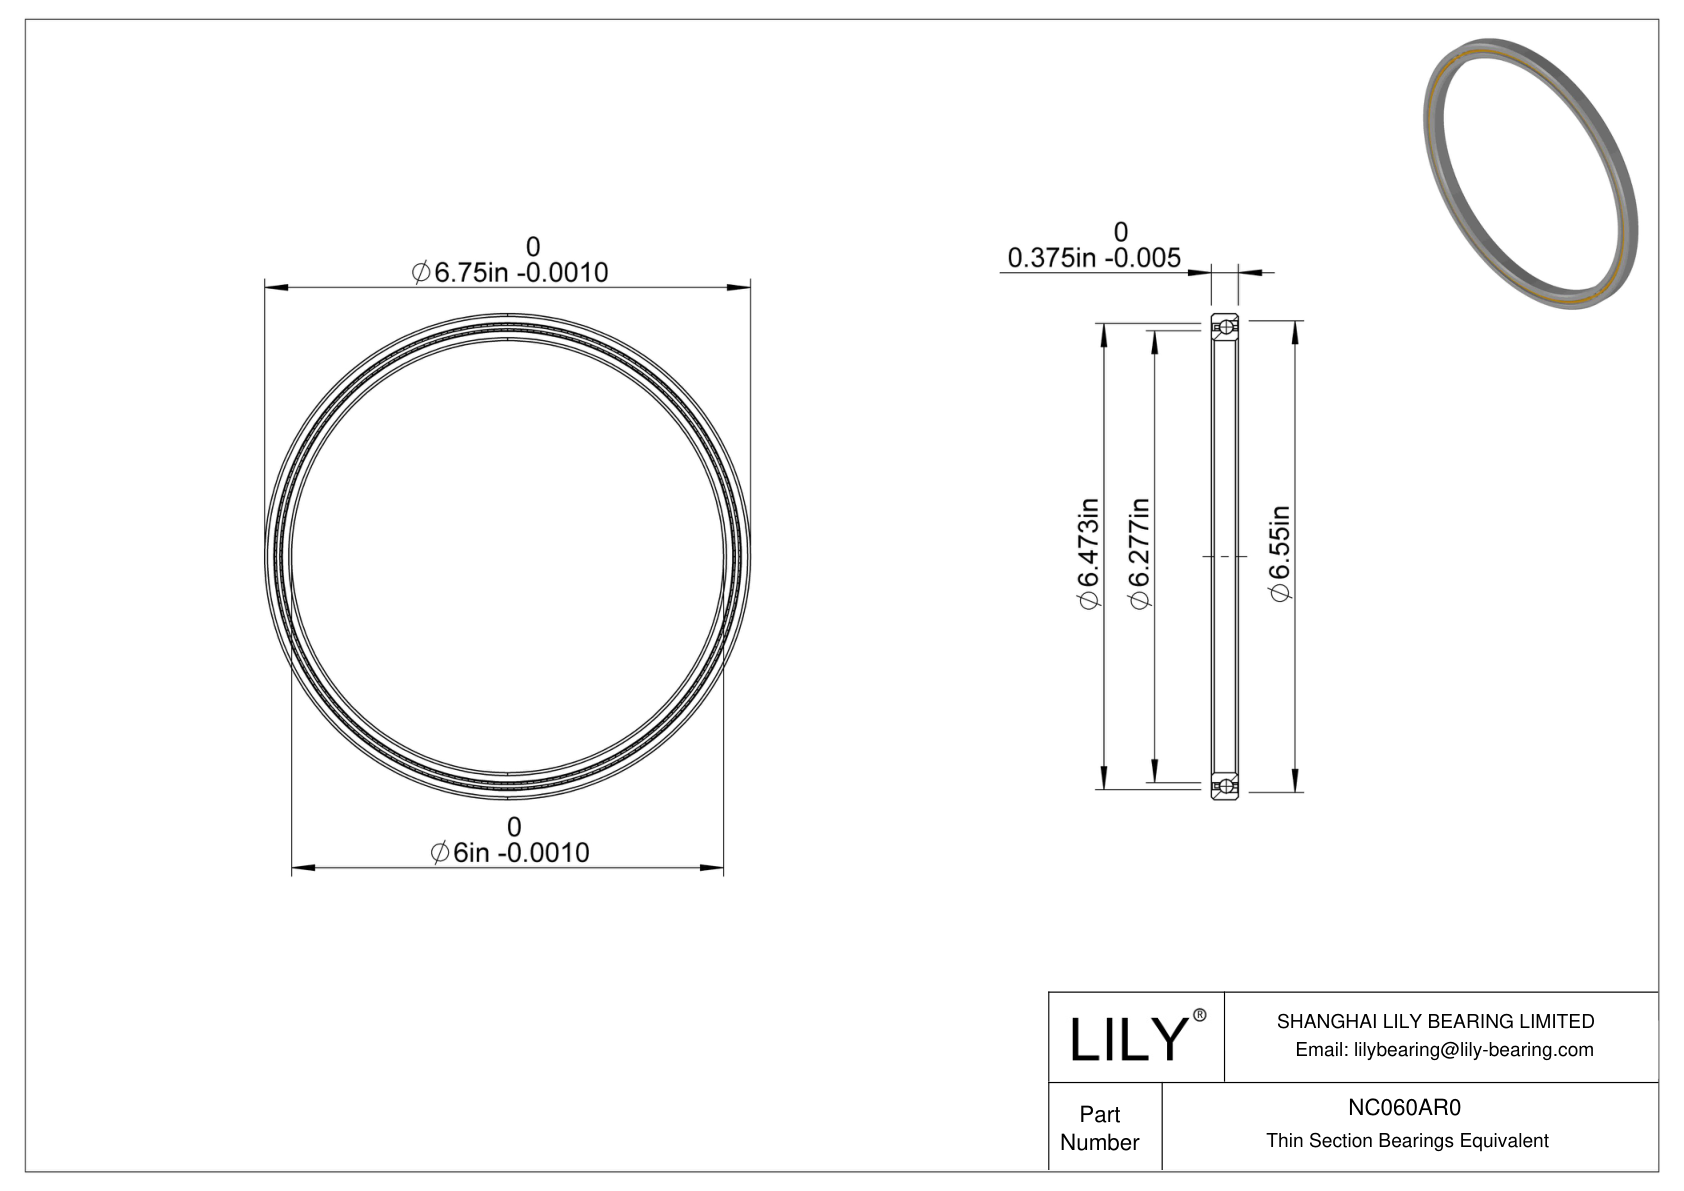 NC060AR0 Constant Section (CS) Bearings cad drawing